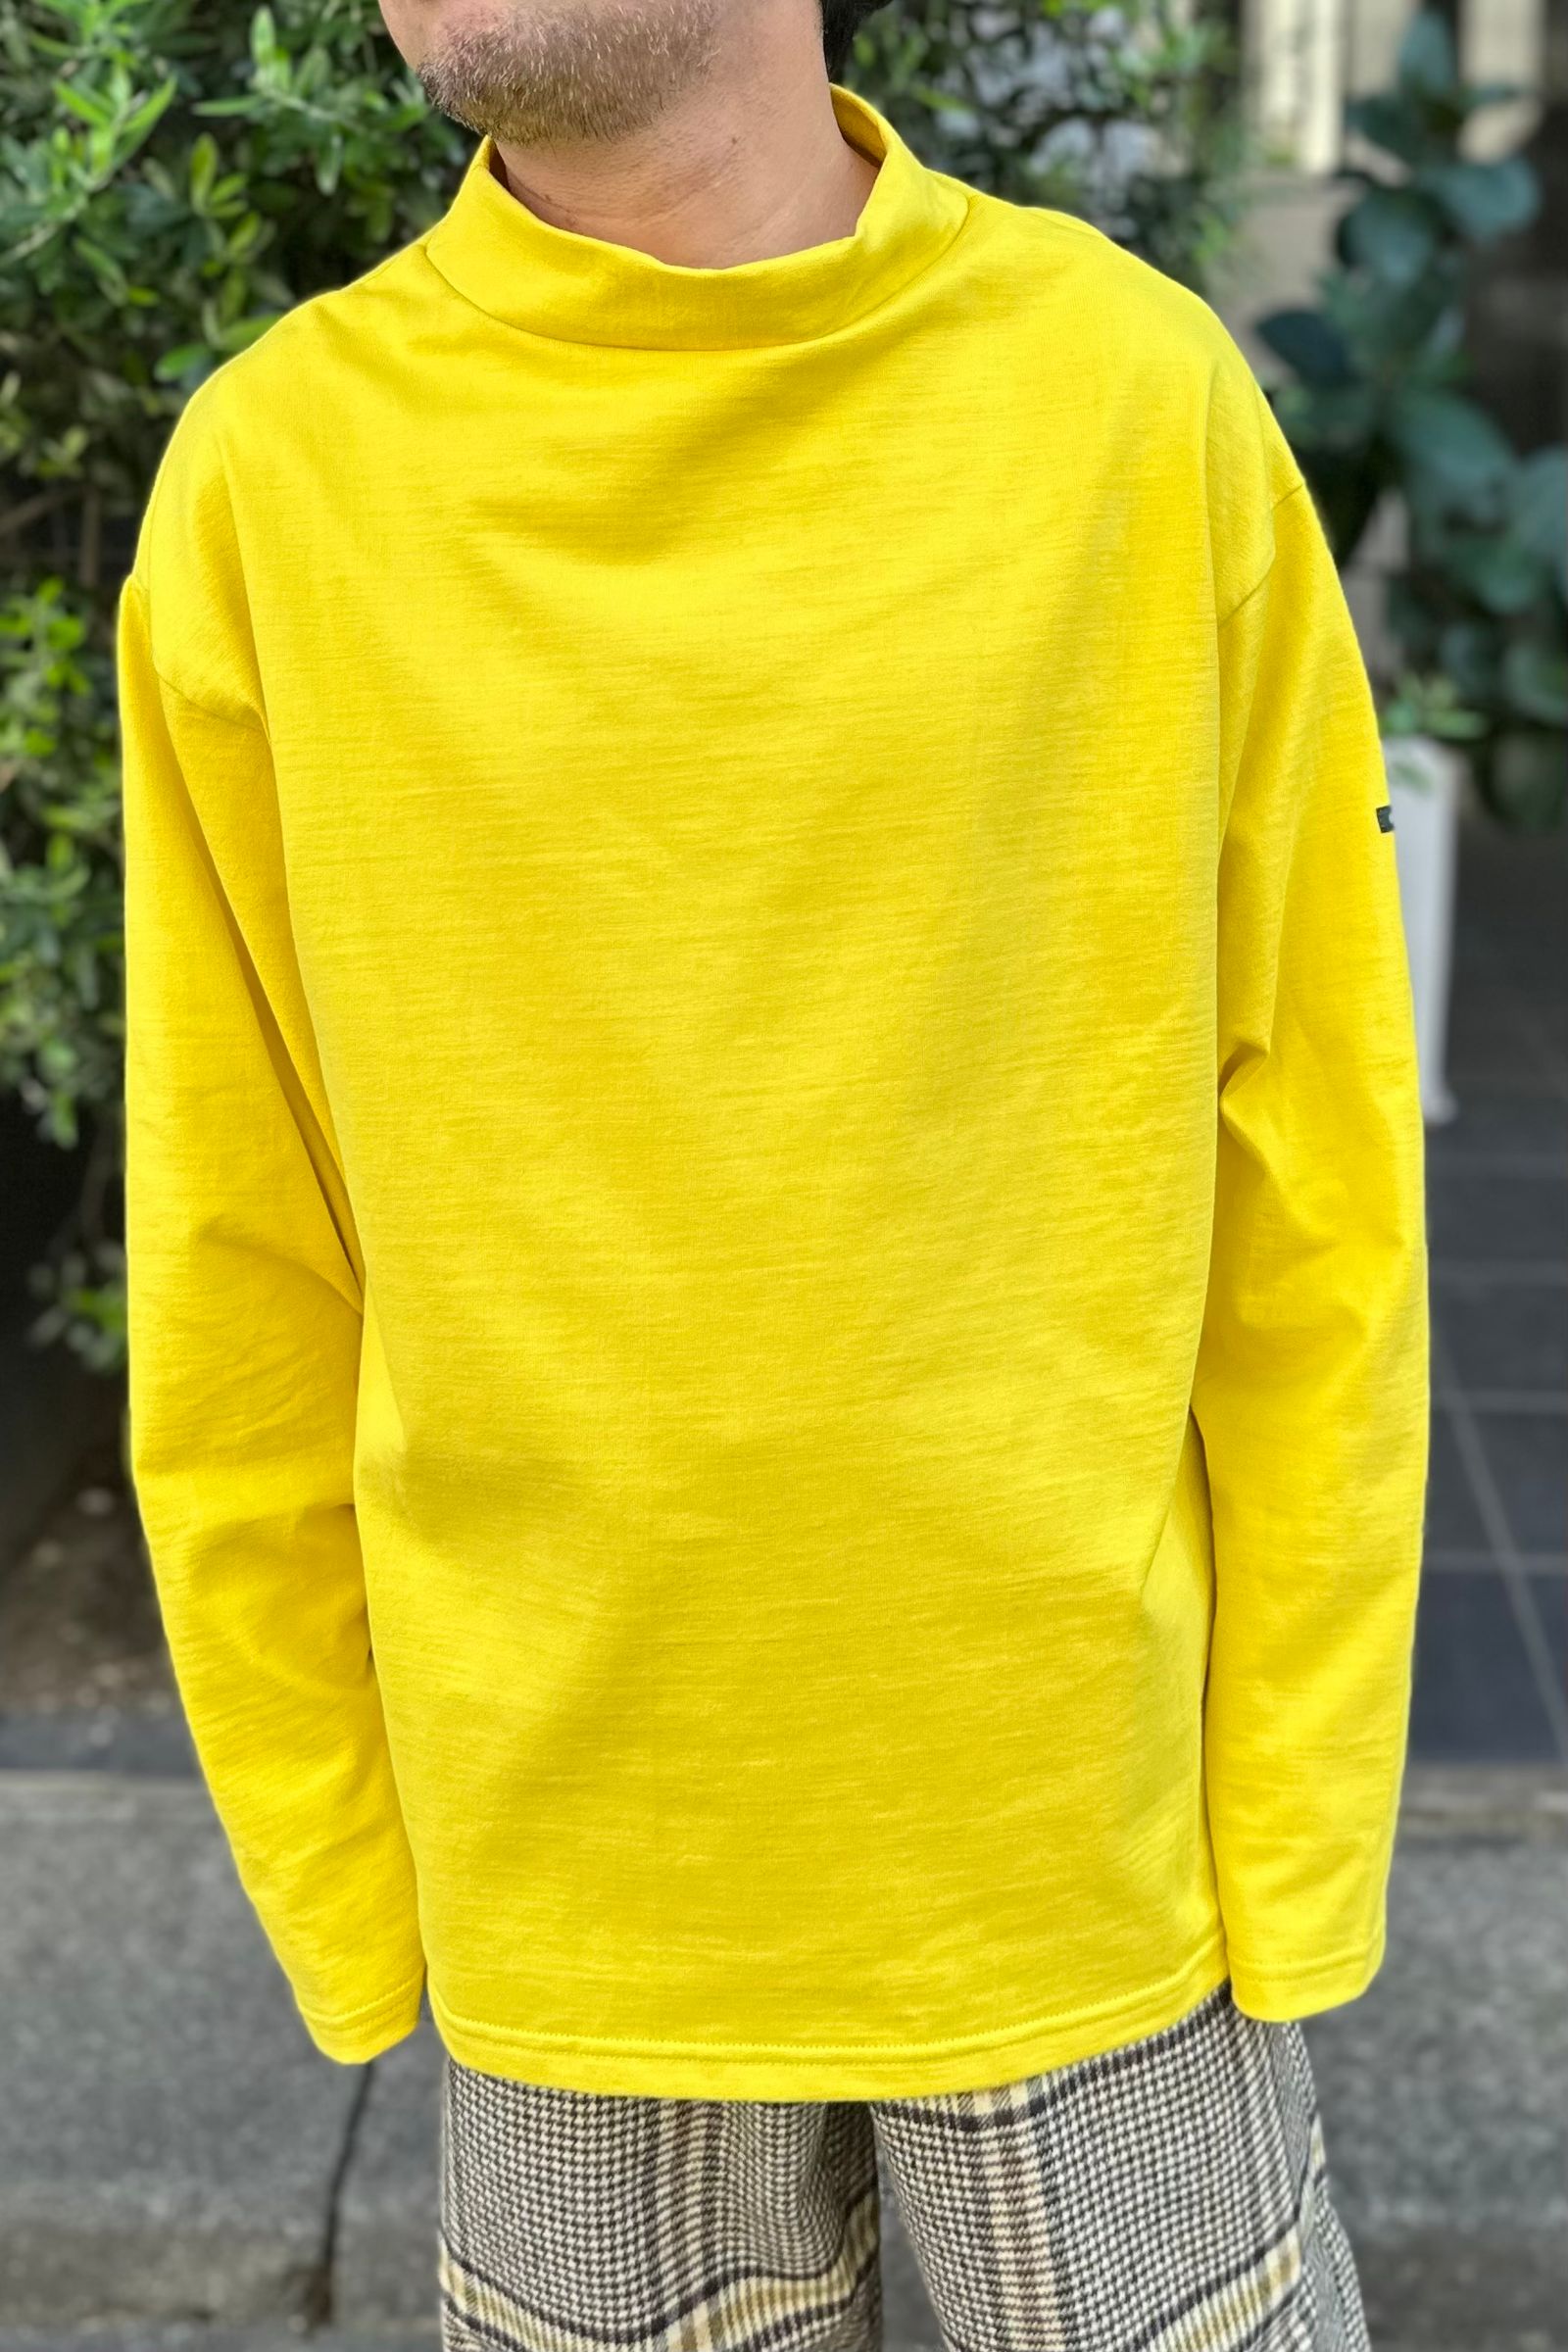 OUTIL - tricot ger -empire yellow- 23aw unisex | asterisk